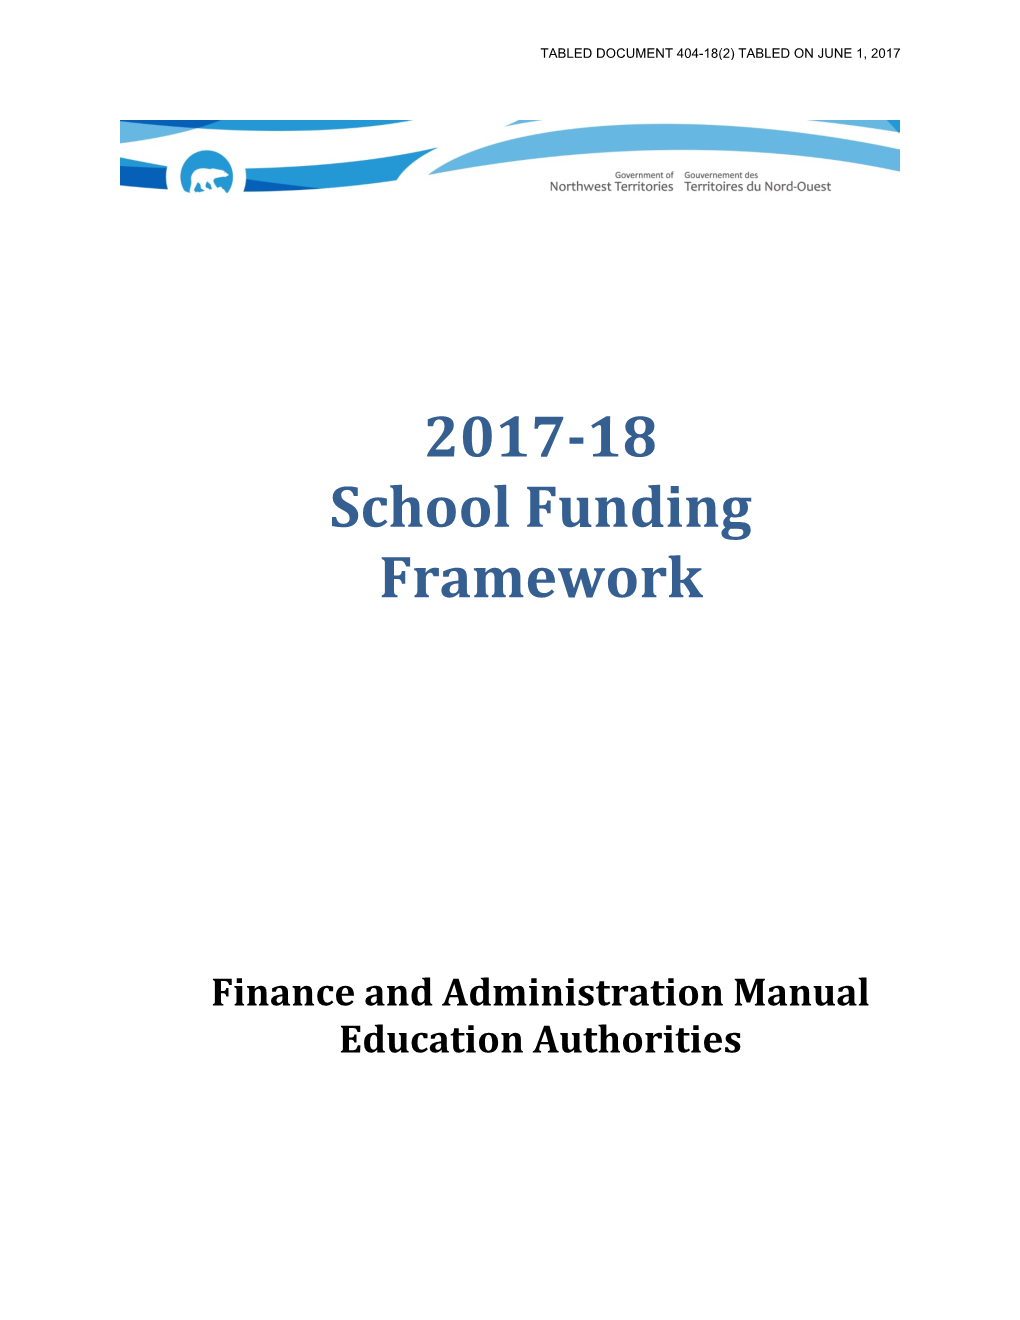 2017-18 School Funding Framework Finance and Administration Manual